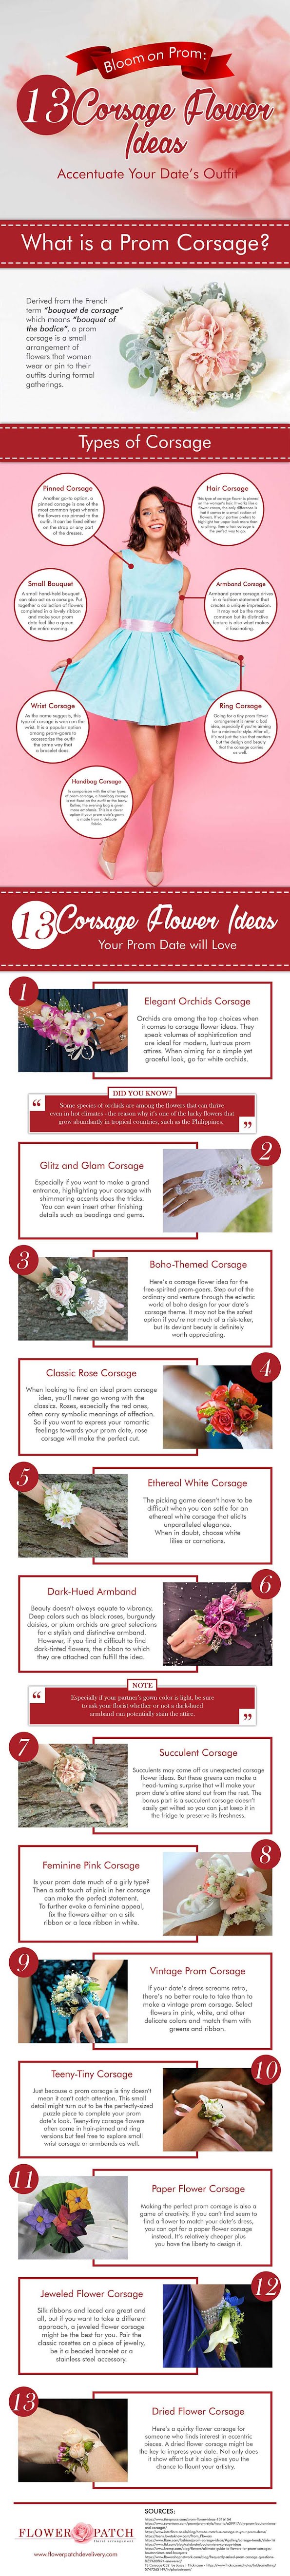 13 Corsage Flower Ideas for Your Prom Night #infographic 